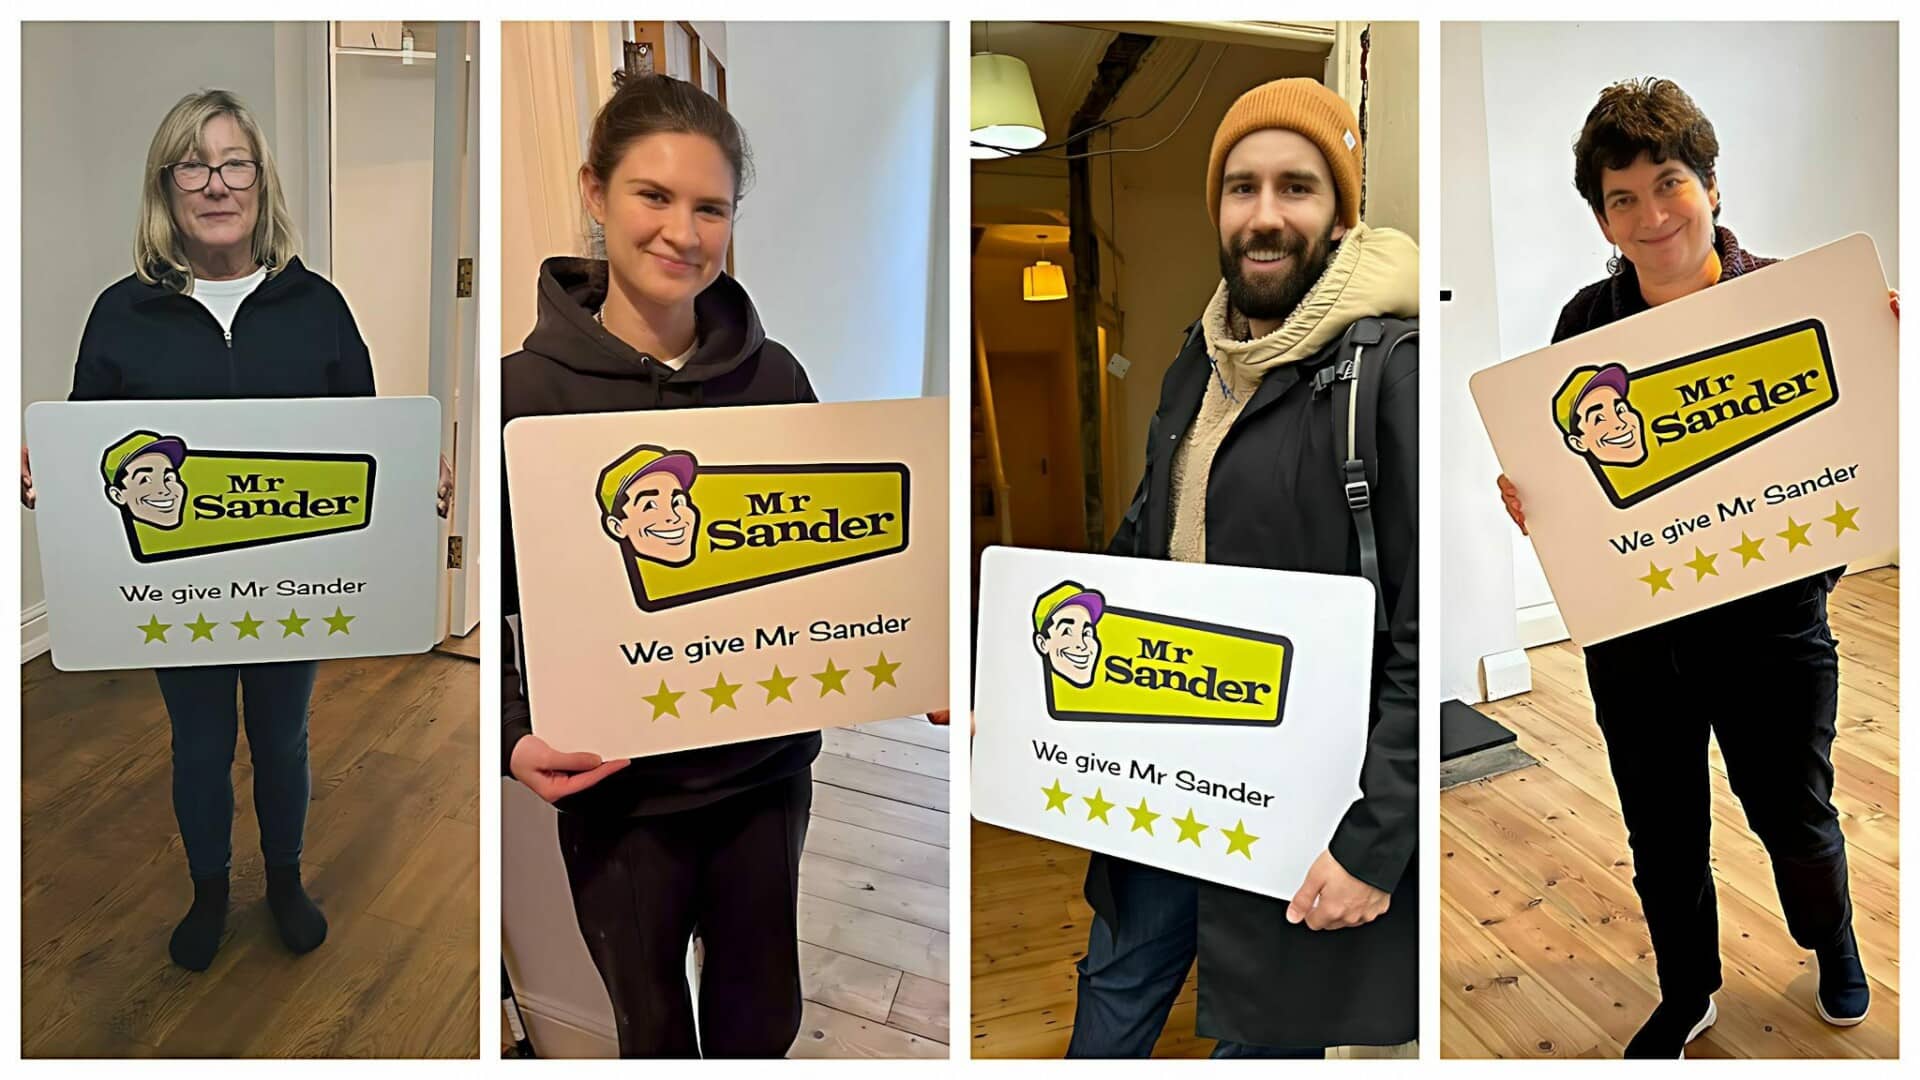 Four people holding signs with the logo and slogan 'Mr Sander' with five stars beneath.